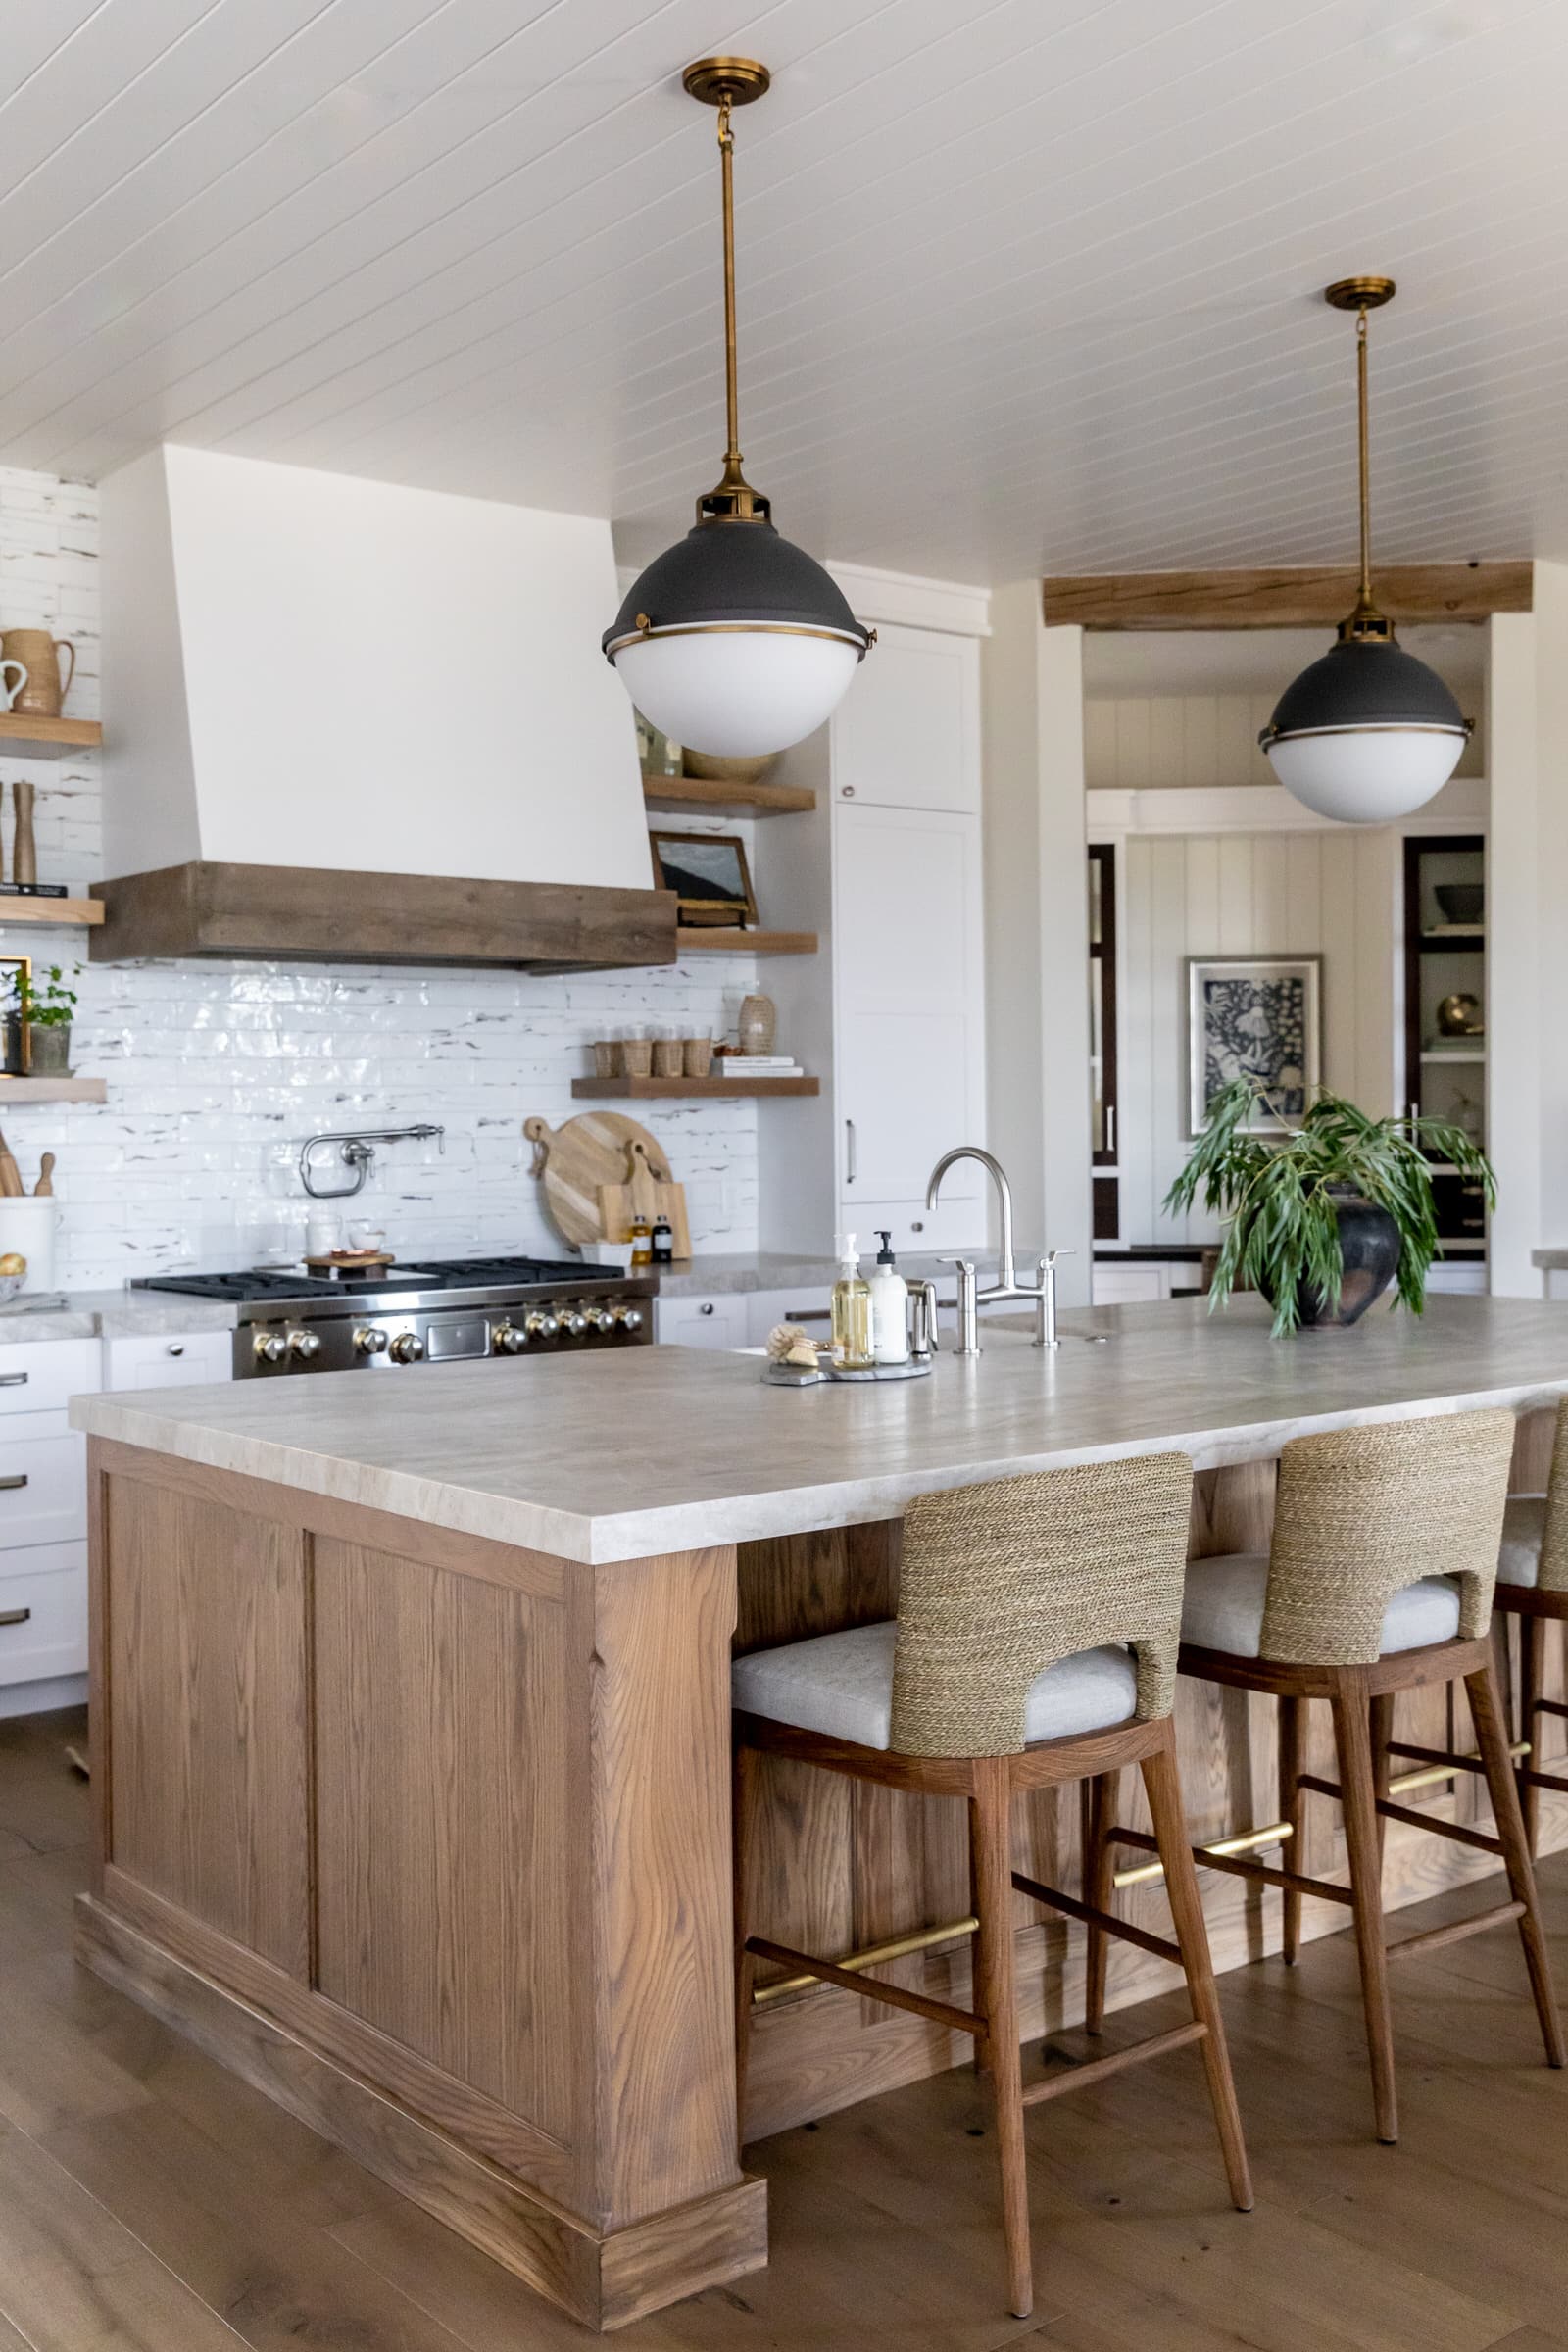 modern farmhouse kitchen with wood island, wood trim on hood, and round globe lights above the island